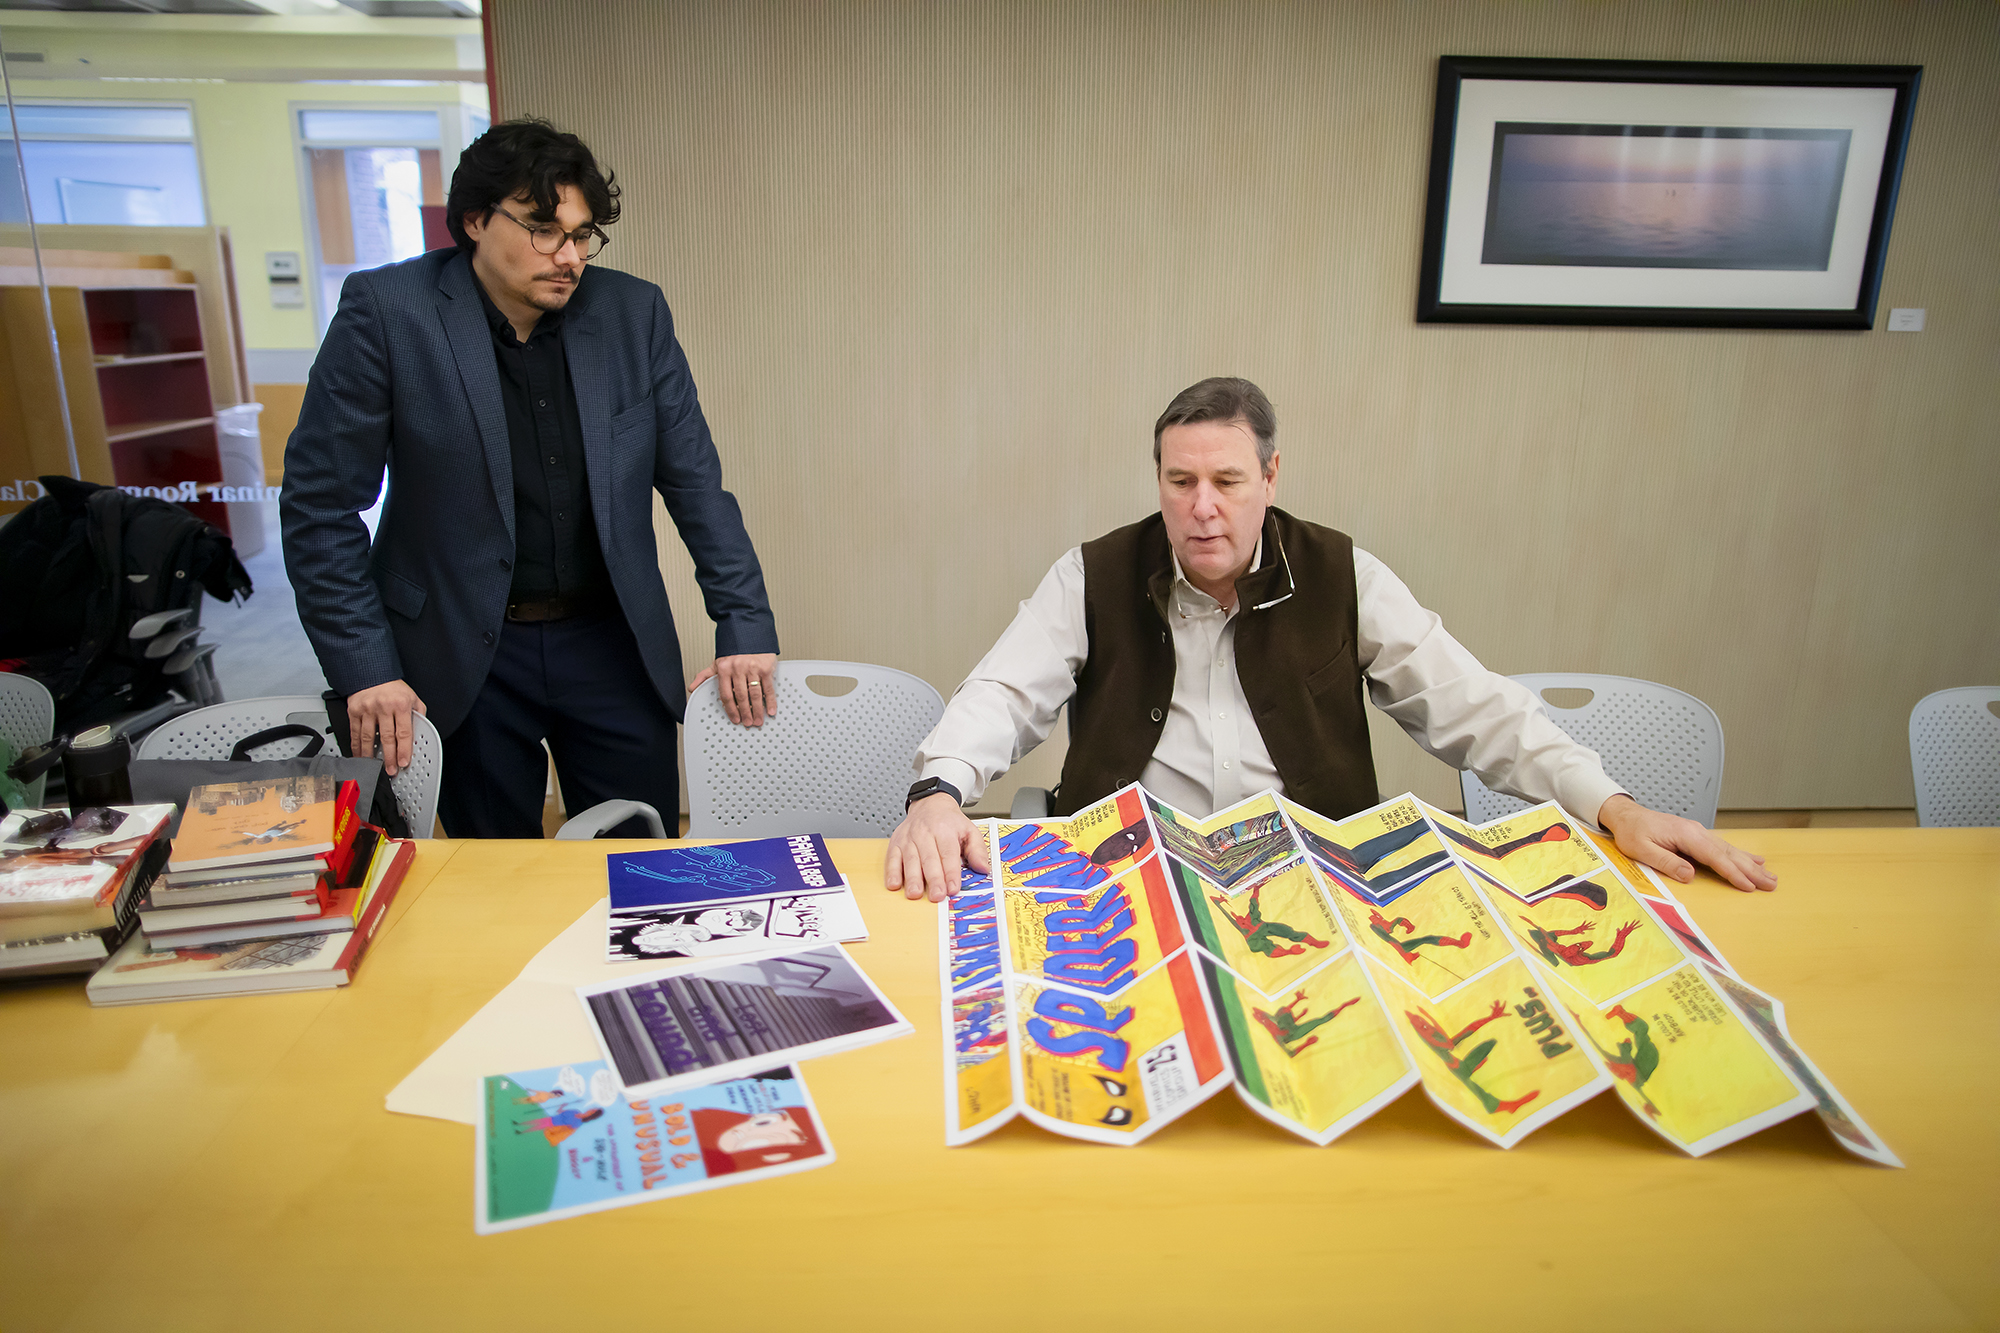 Cloutier and Berry in a conference room with foldout Spider-Man comic